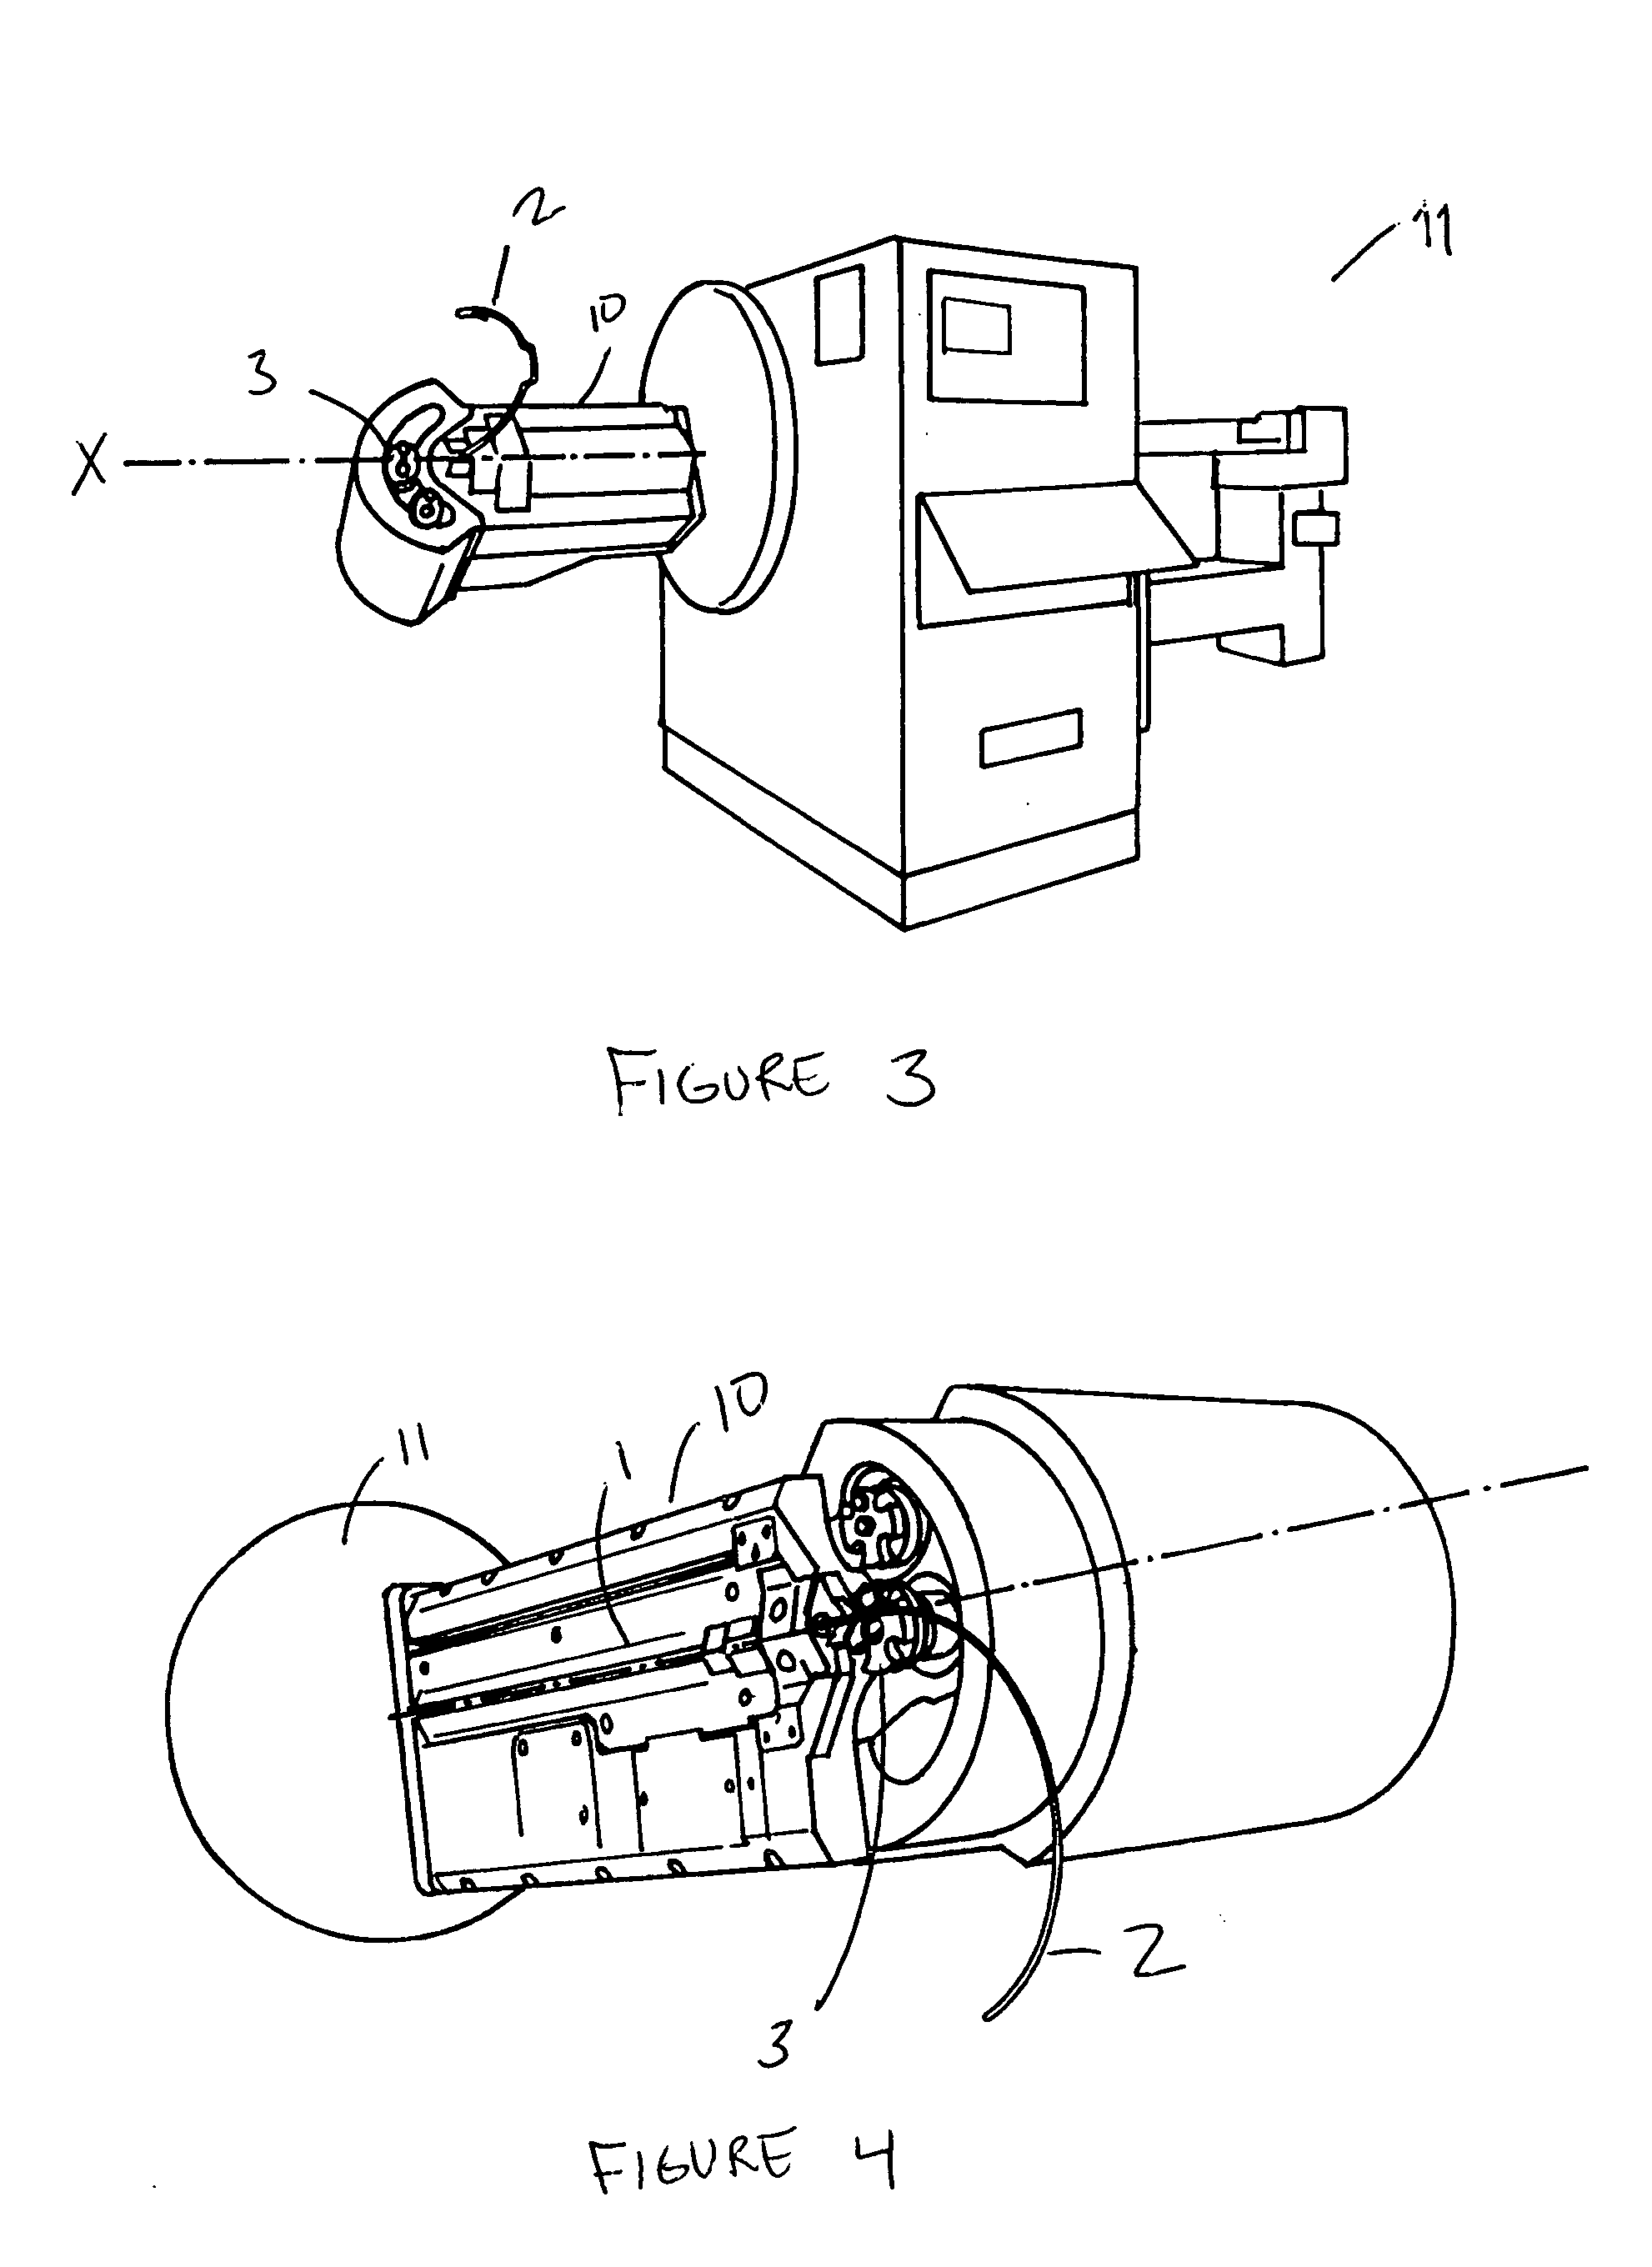 Wire bending device